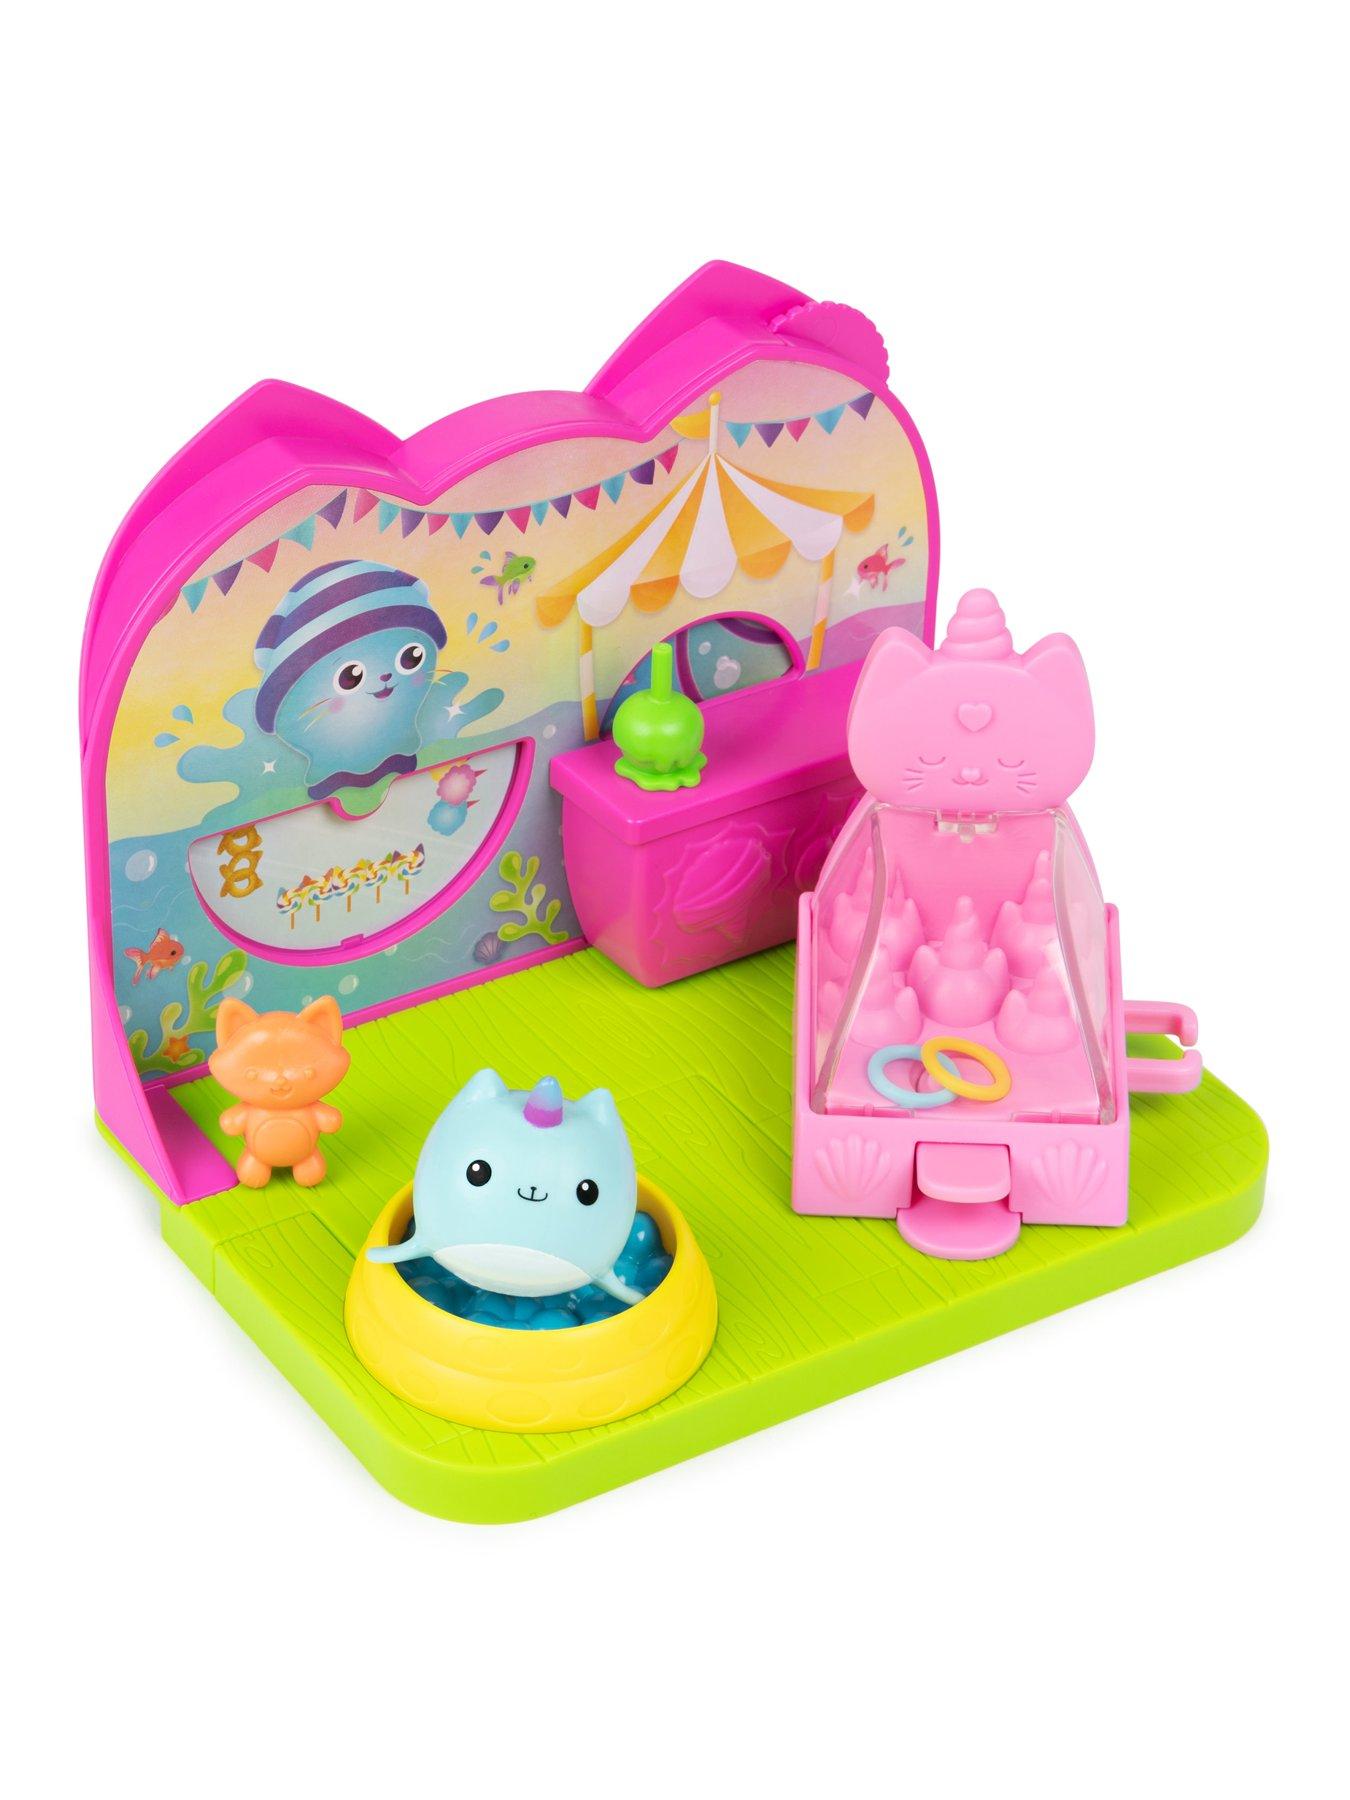 Luv Her Gabby's Dollhouse Girls BFF 6 Piece Toy Jewelry Box Set with 2  Rings, 2 Bead Bracelets and Snap Hair Clips Ages 3+